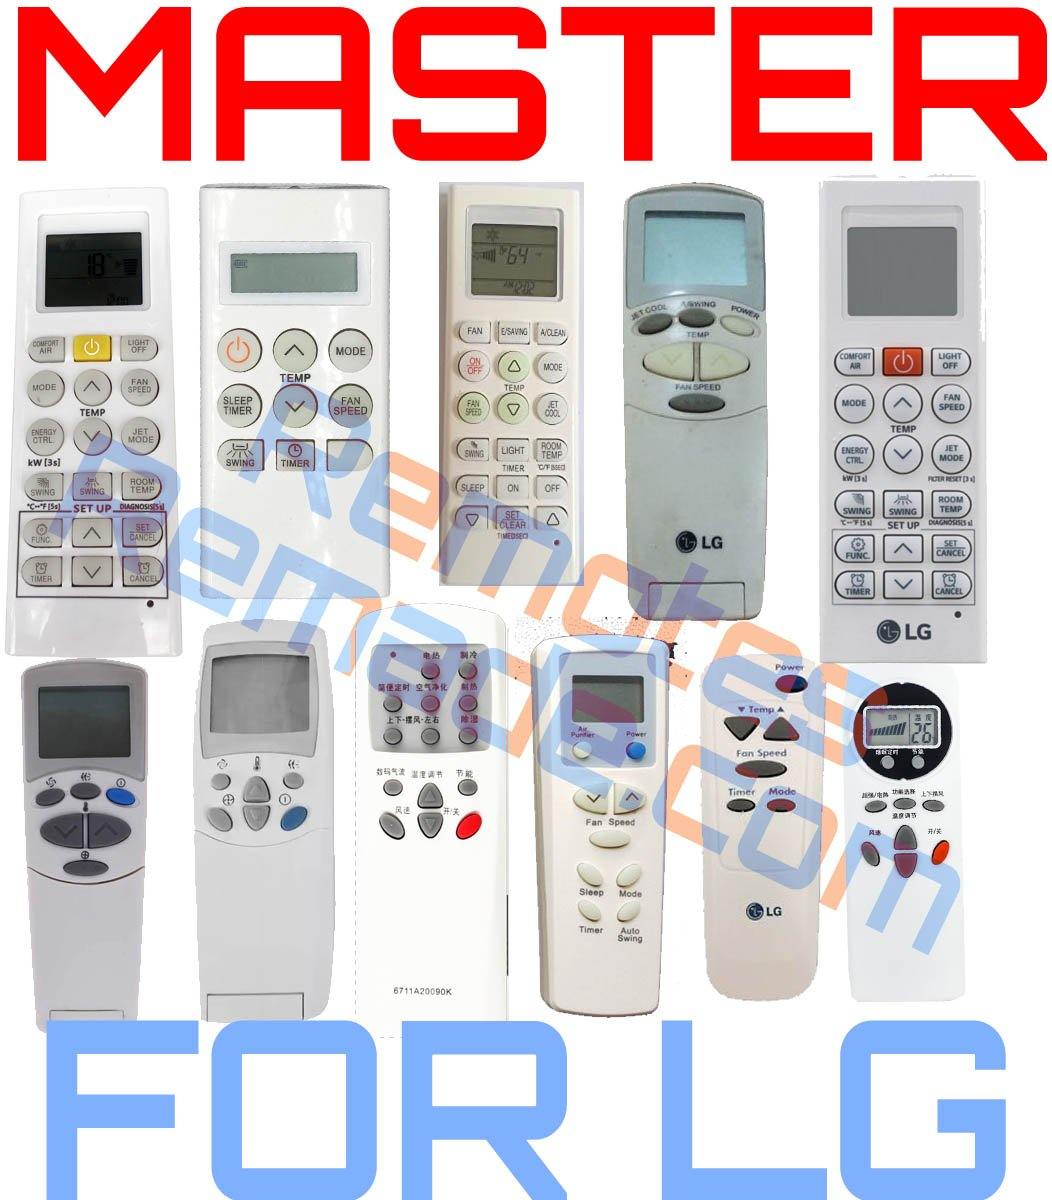 Master Remote For all LG Air Conditioners - China Air Conditioner Remotes :: Cheapest AC Remote Solutions